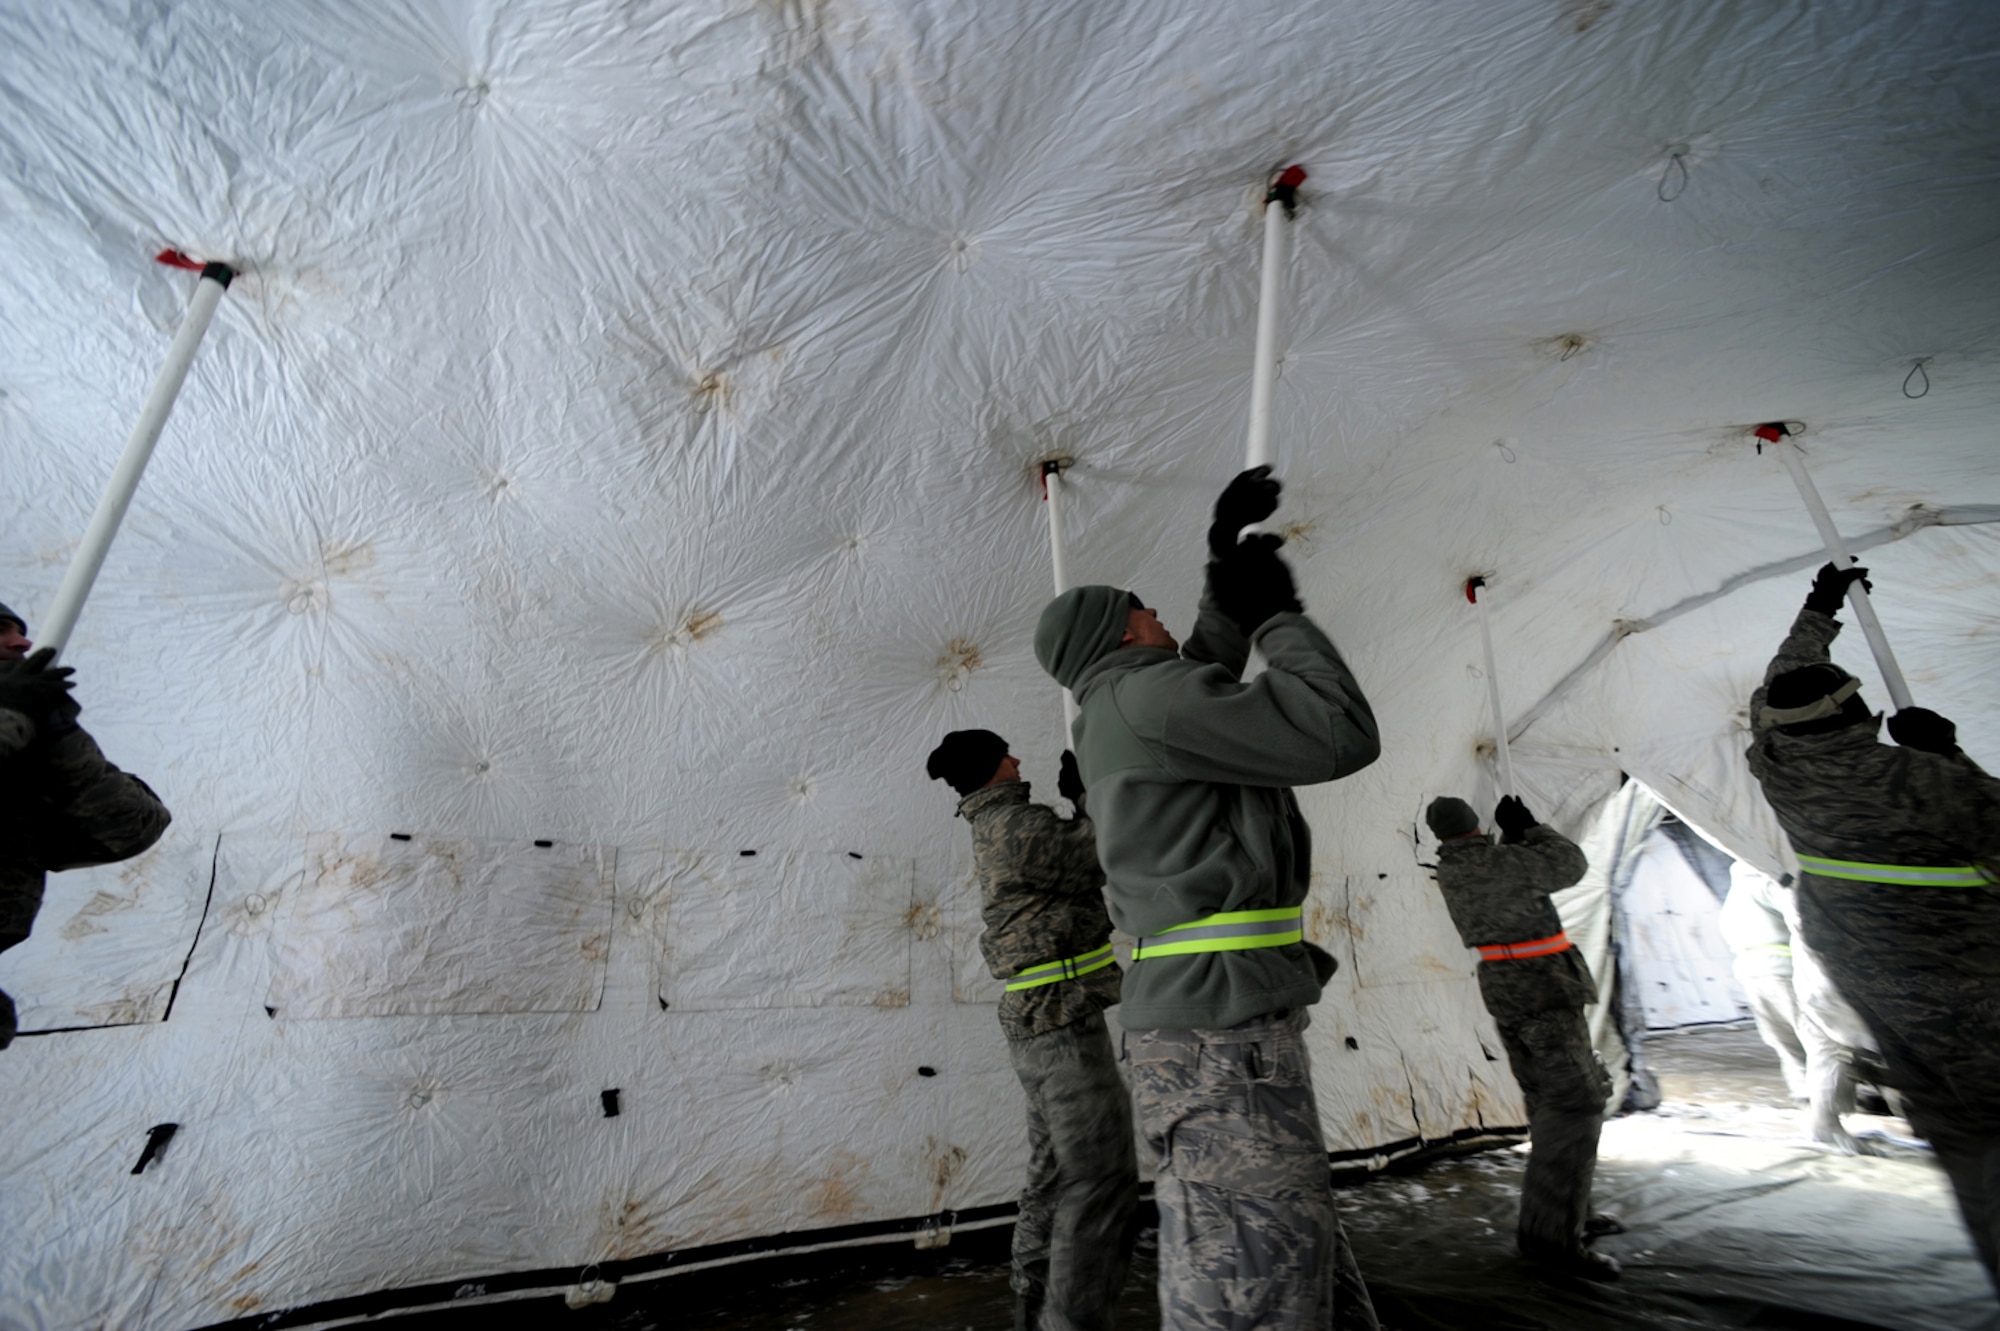 U.S. Air Force military members from the 435th Air Ground Operations Wing, Ramstein Air Base, Germany, construct tents at Flugplatz Bitburg, Germany, Jan. 27, 2010, in preparation of Ramstein's operational readiness inspection in September. The units are setting up bare-base operations as part of the dual-wing operational readiness exercise with the 86th Airlift Wing. This is the second of five operational readiness exercises. (U.S. Air Force photo by Staff Sgt. Sarayuth Pinthong)